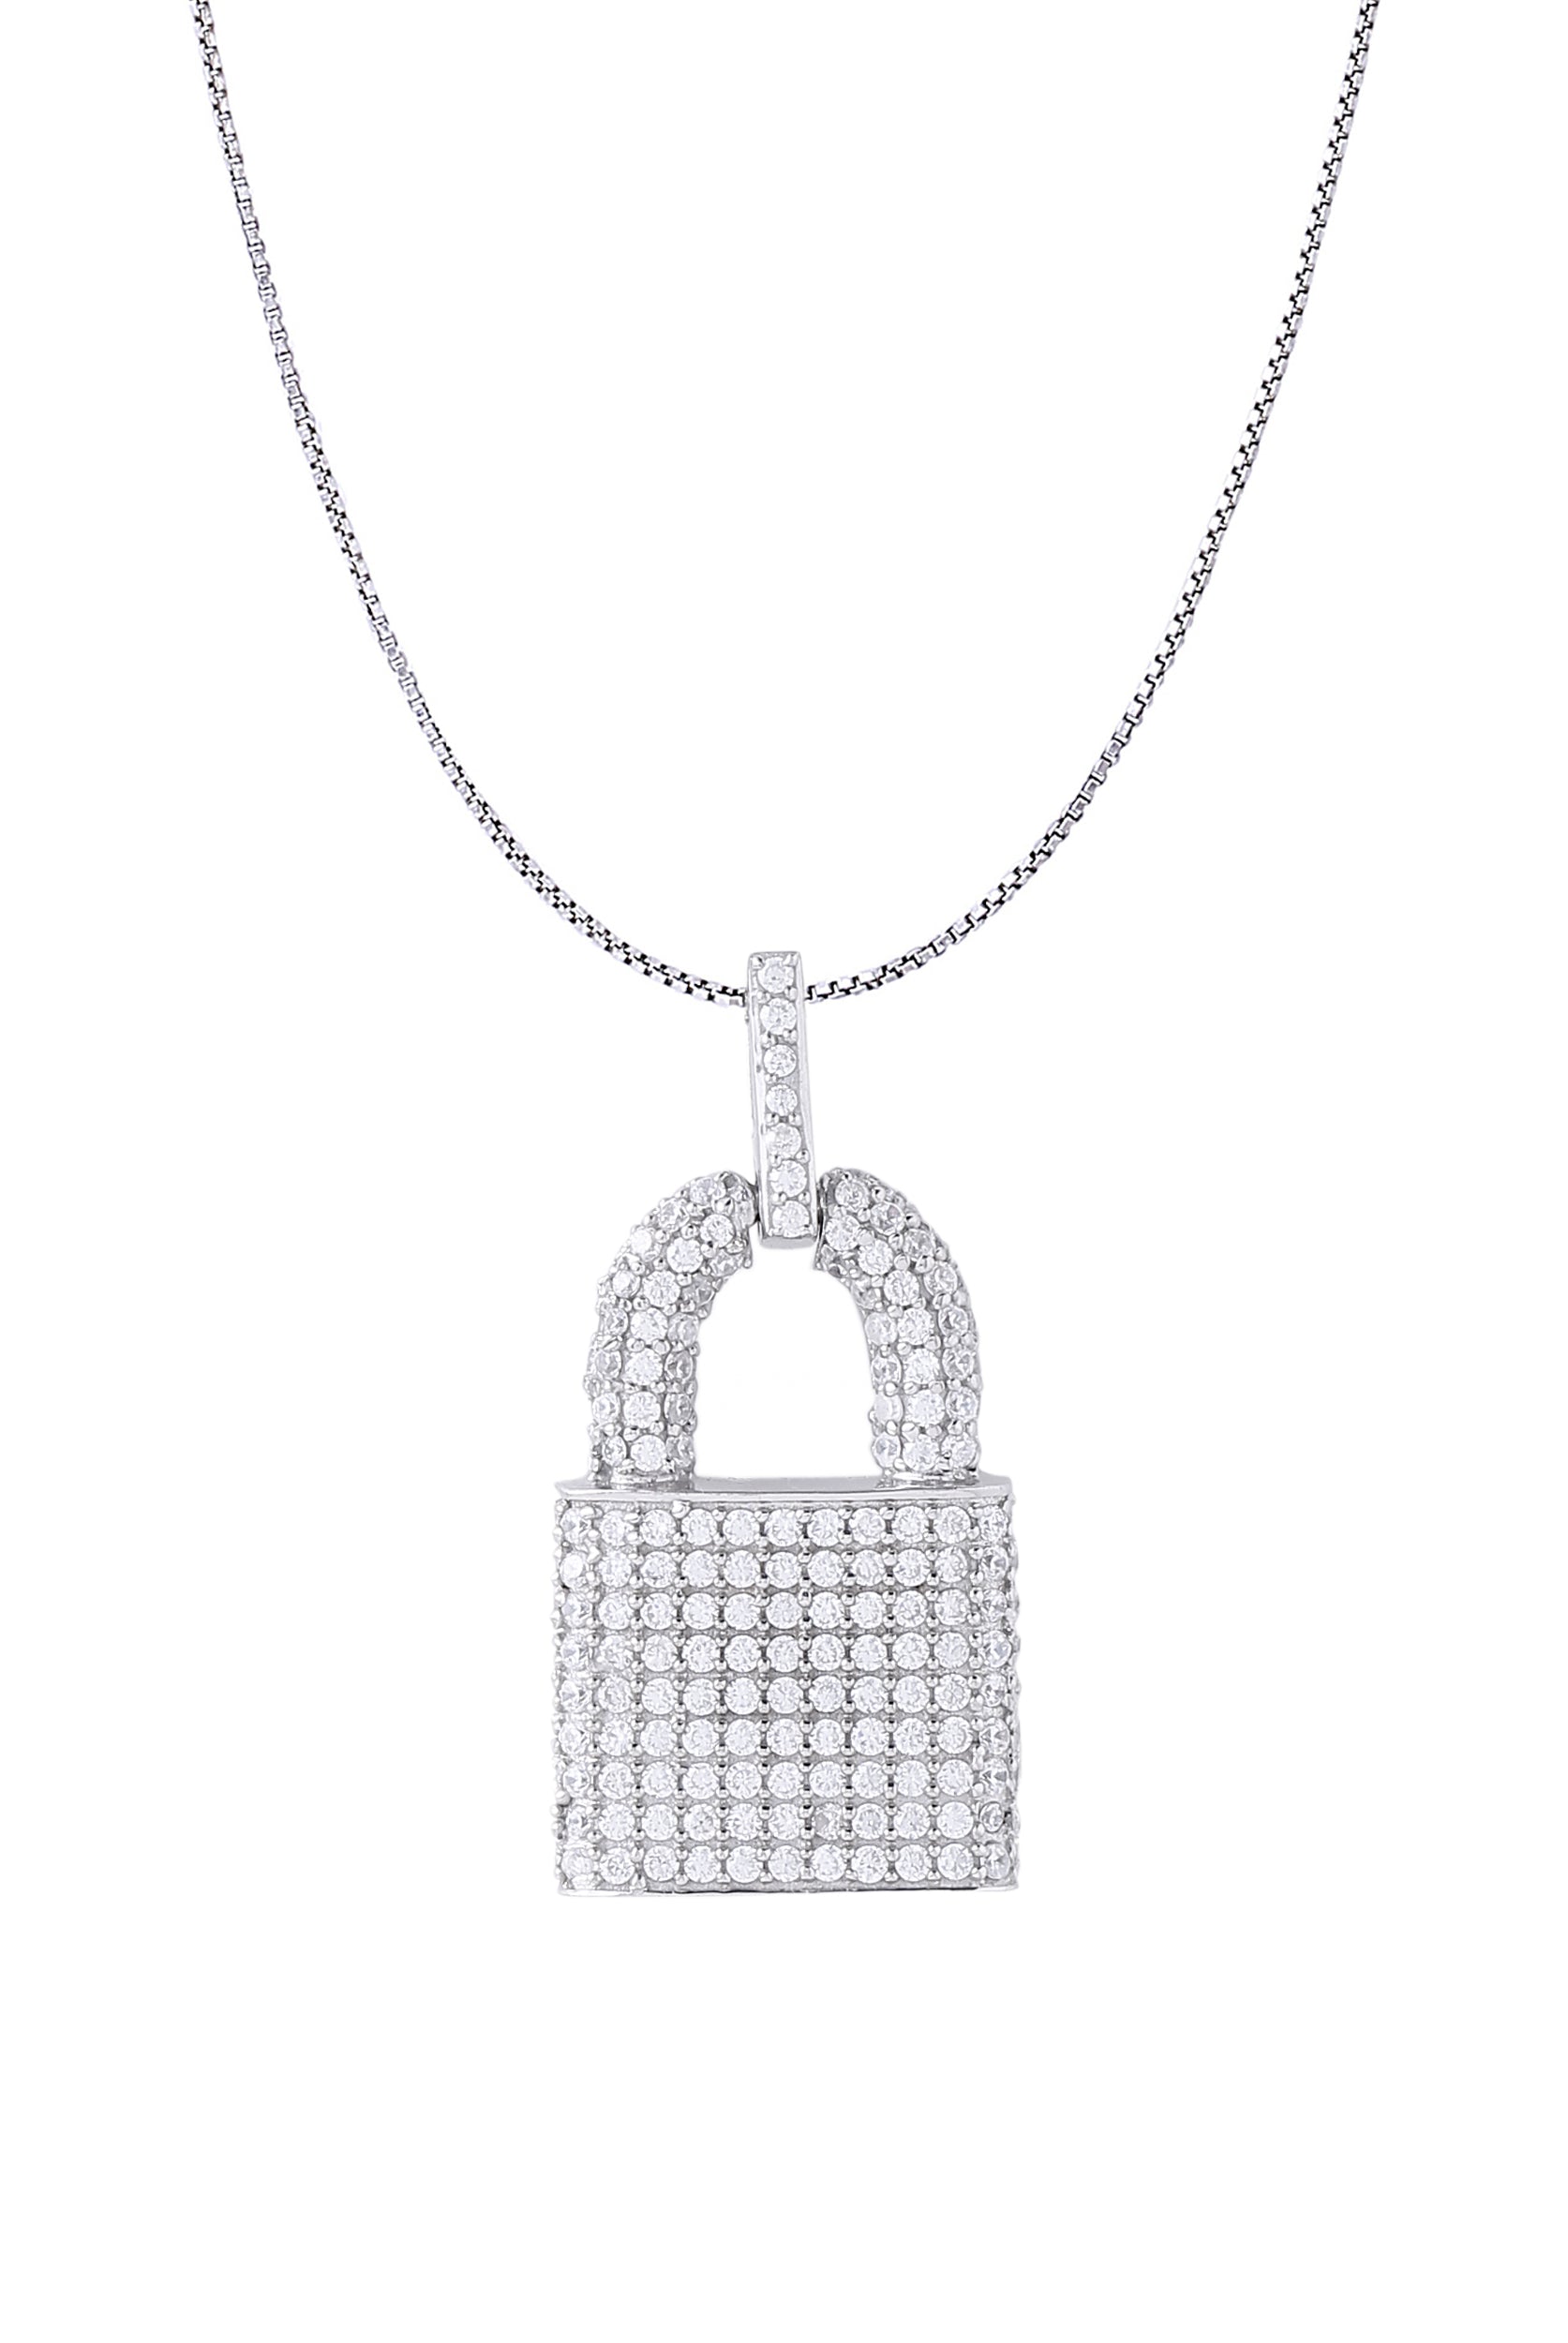 White Gold Color Lock Pendant Made of 925 Sterling Silver Material with 20 Inch Long Silver Chain